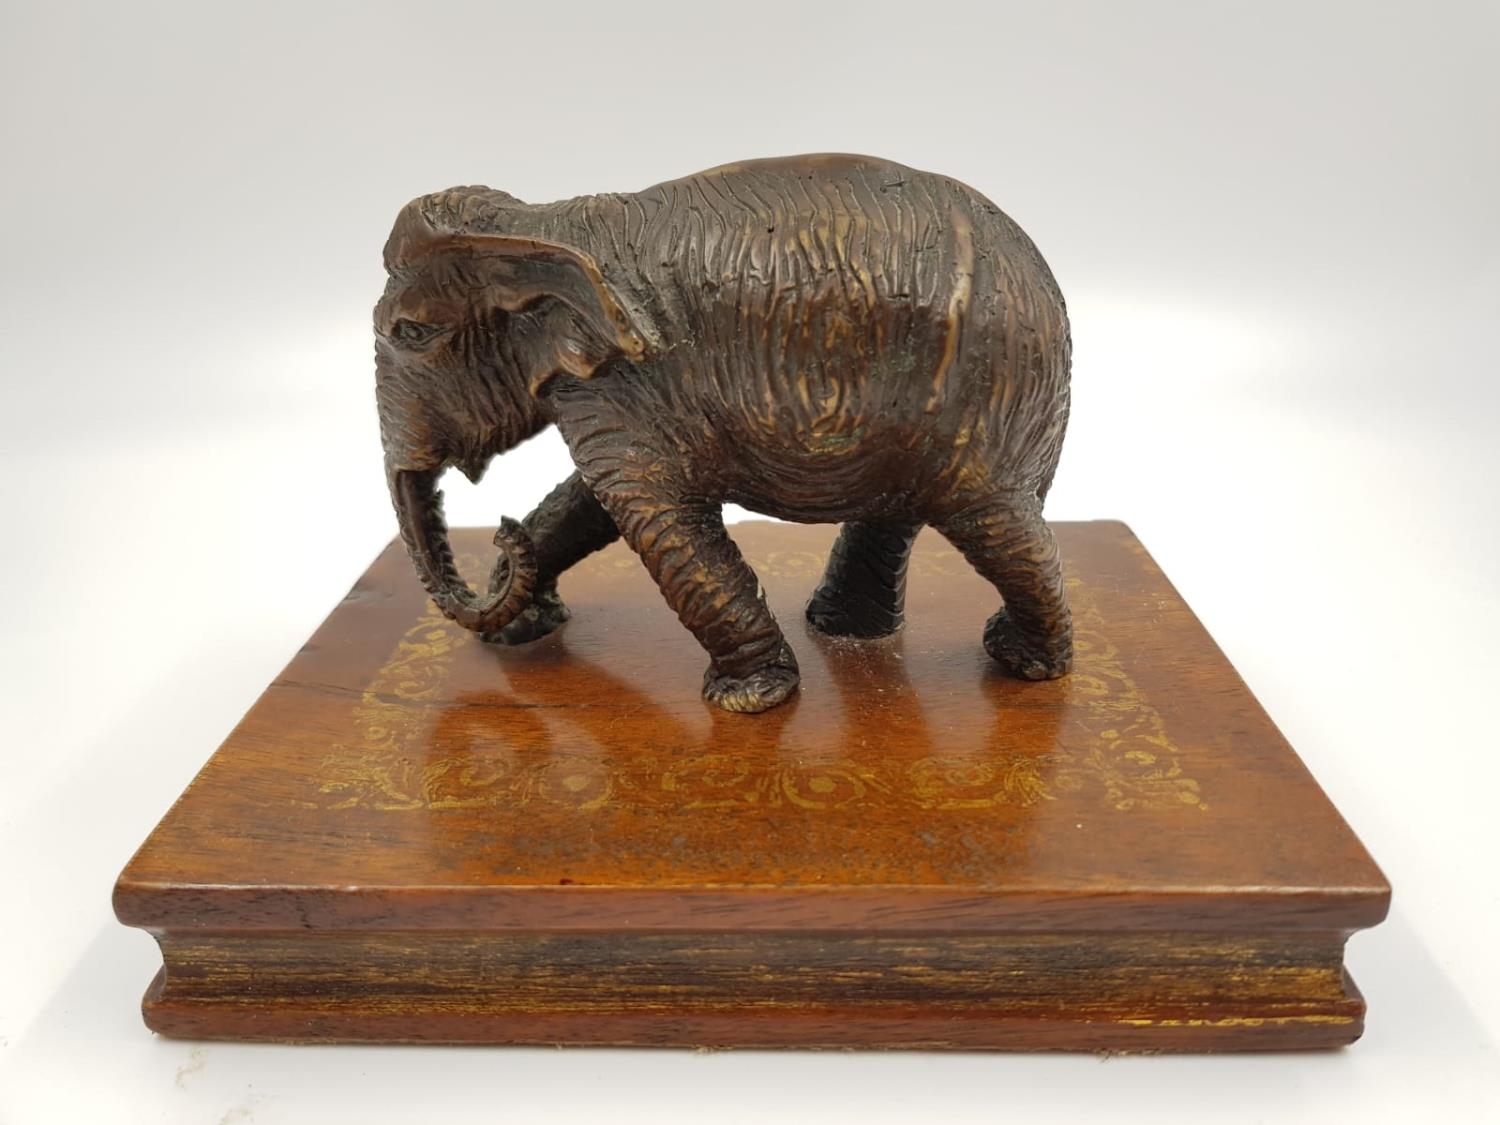 3 Vintage elephant figurines. 1 ceramic, made in France by Sevres, the other two are brass; one of - Image 2 of 11